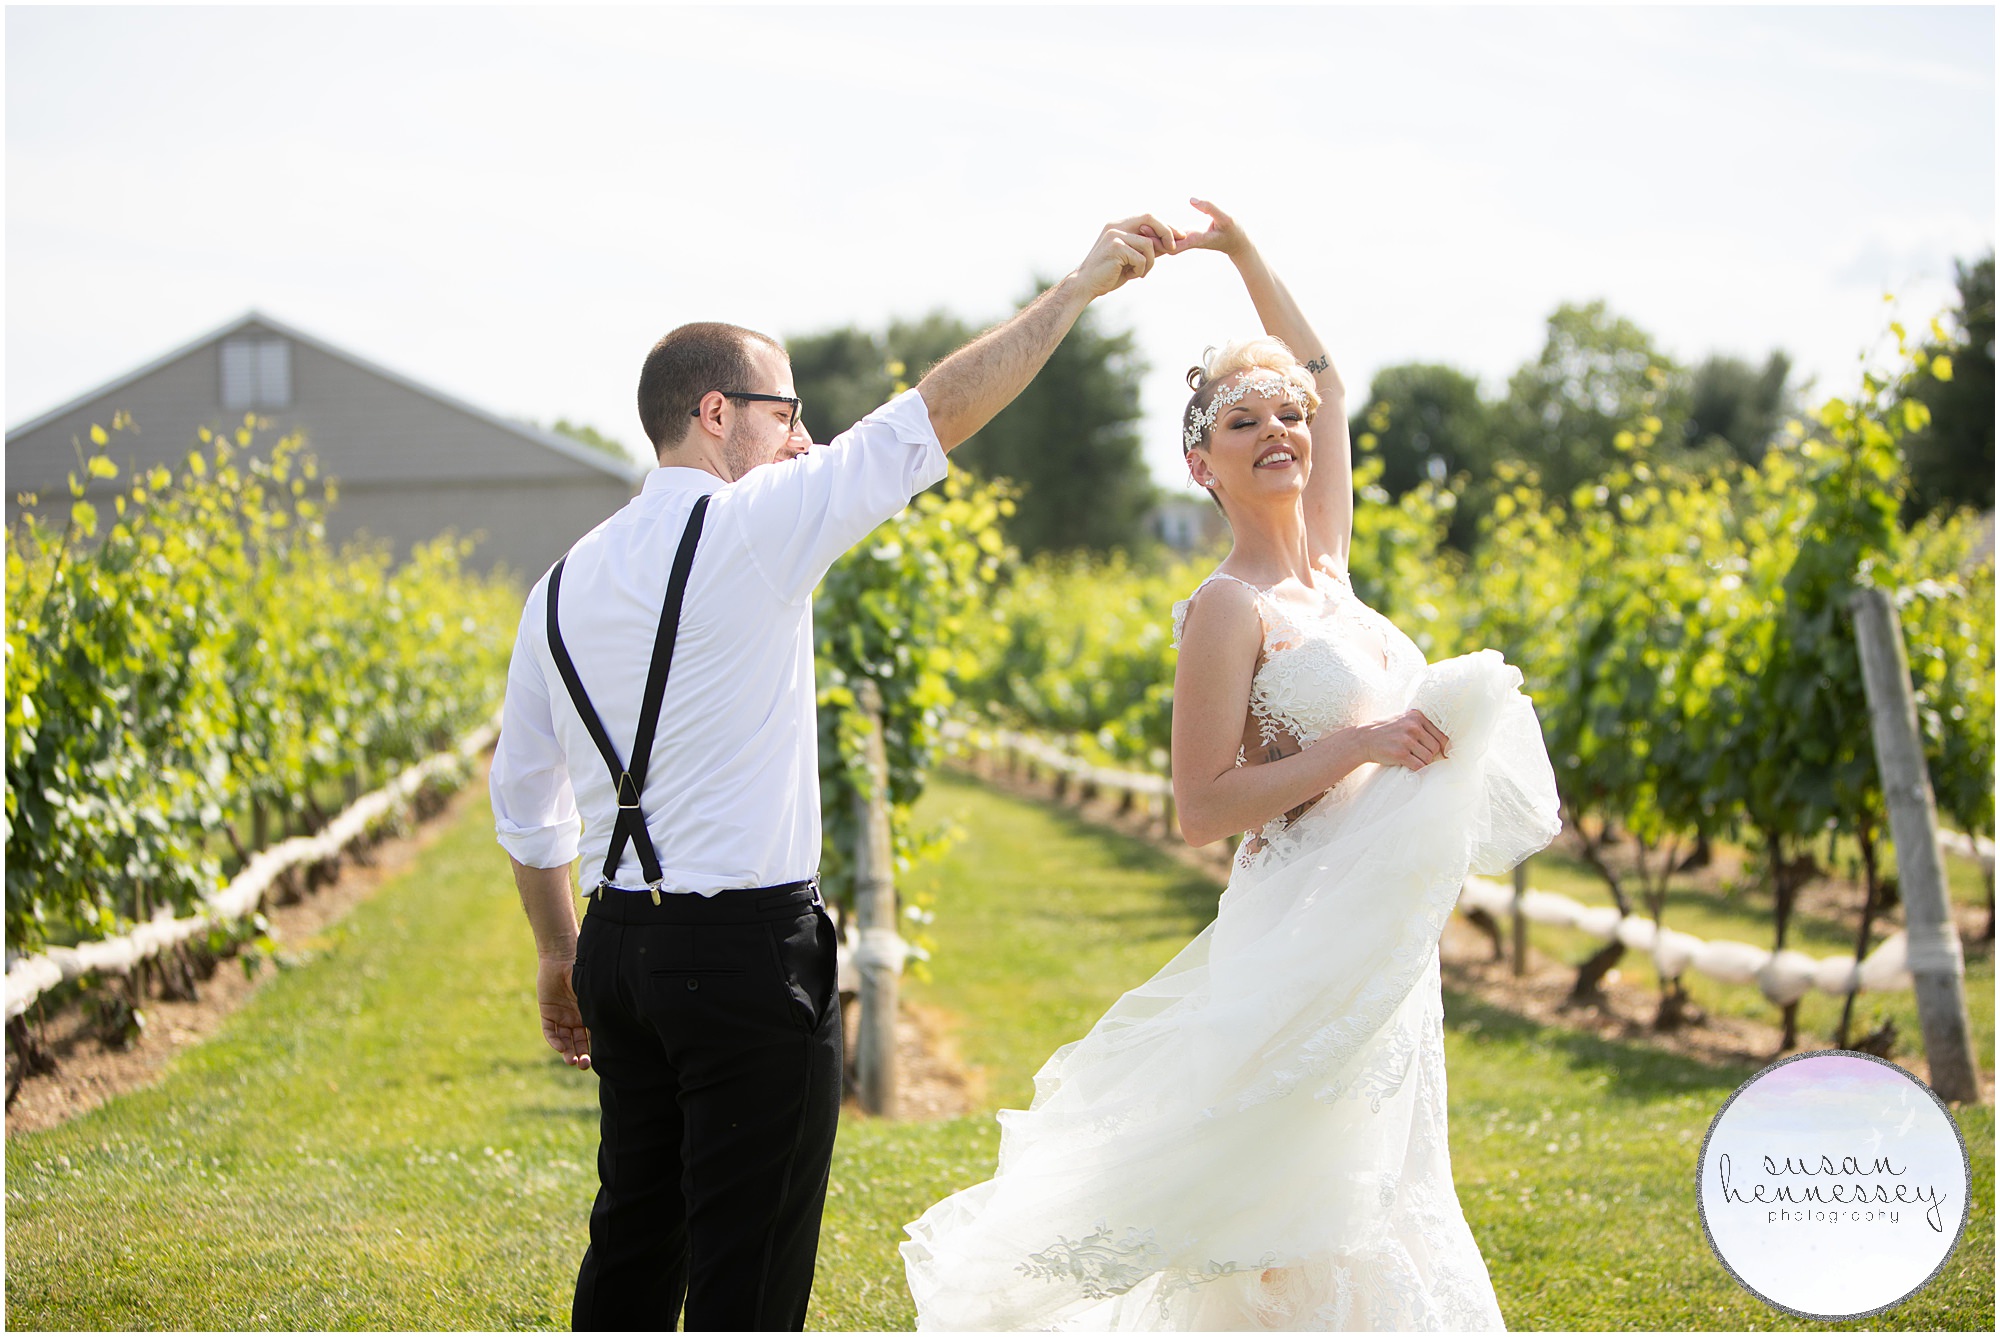 A summer wedding at a winery in New Jersey